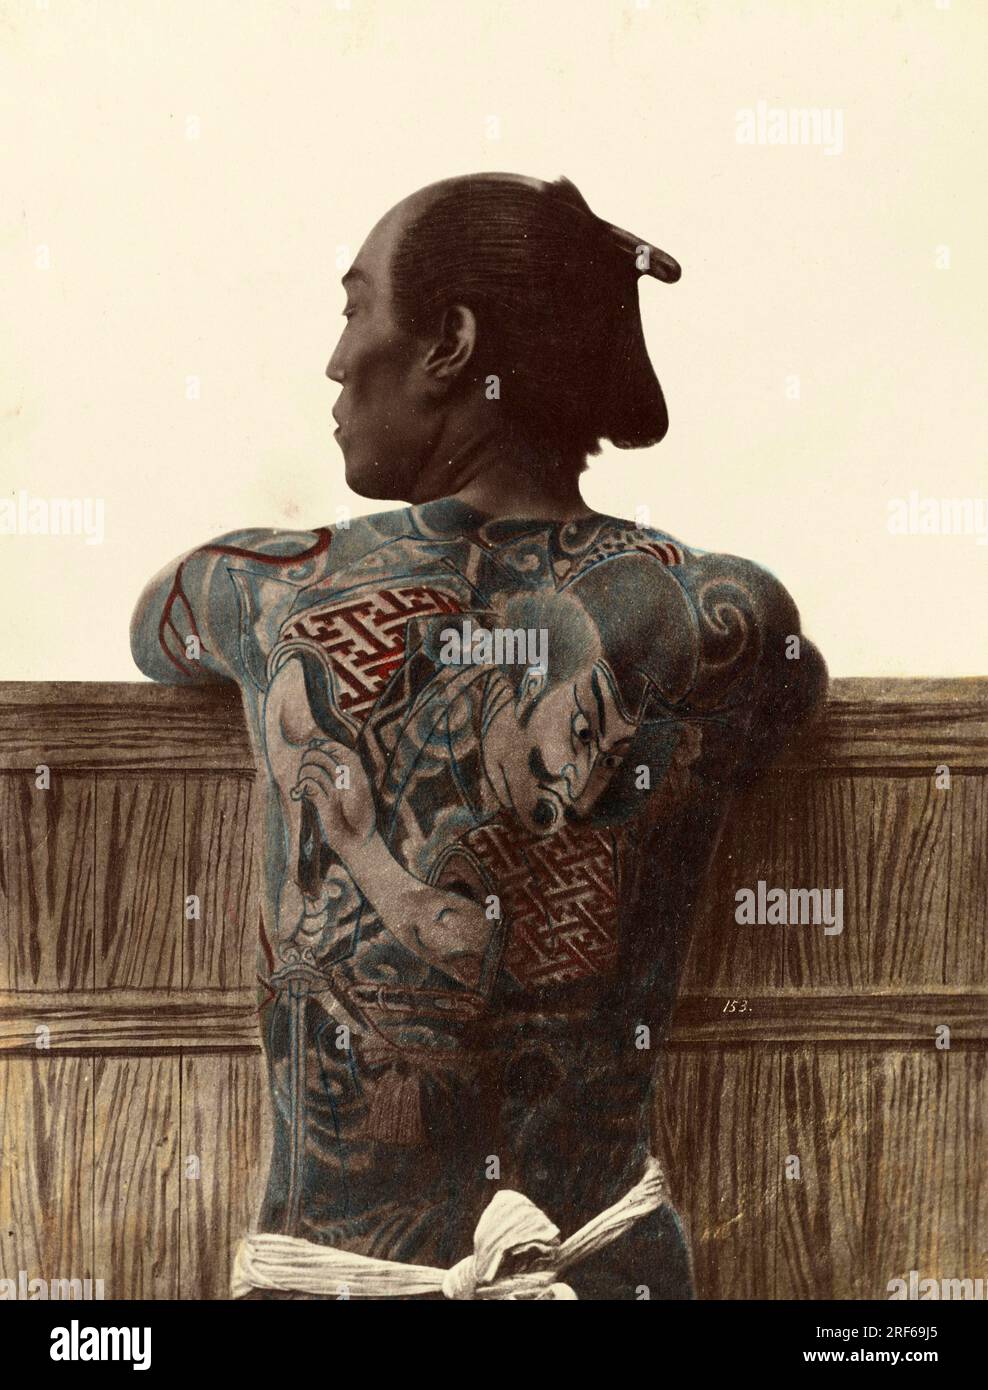 photography tattoo - Alamy hi-res images stock and back Japanese